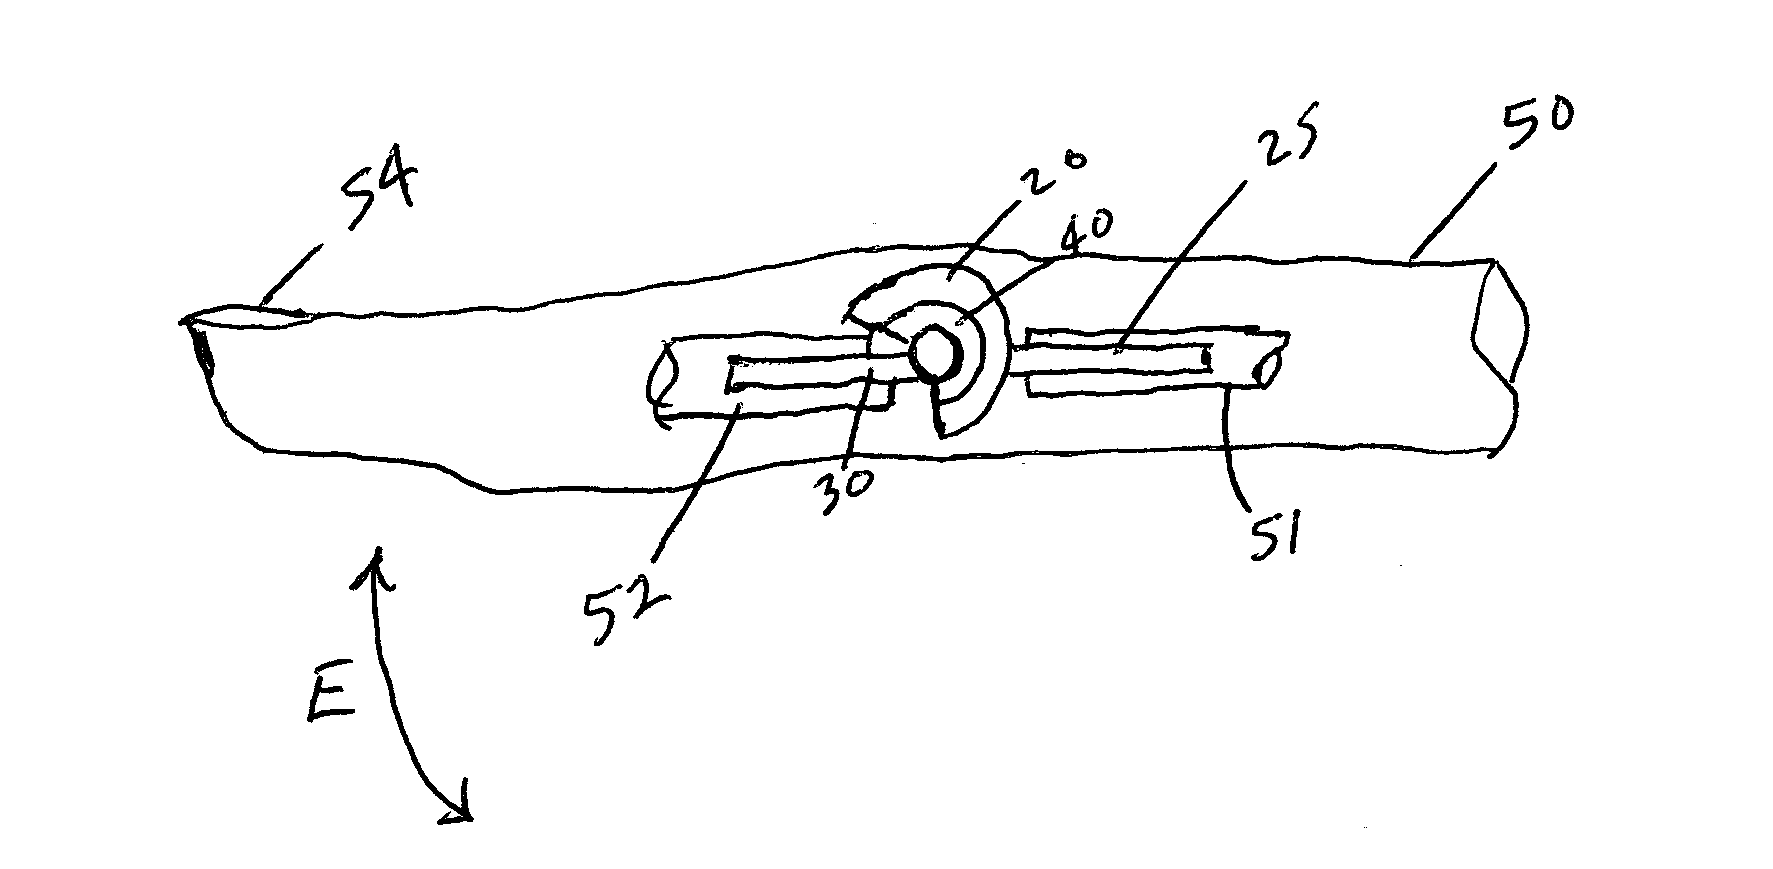 Implants and Methods of Making and Using the Same